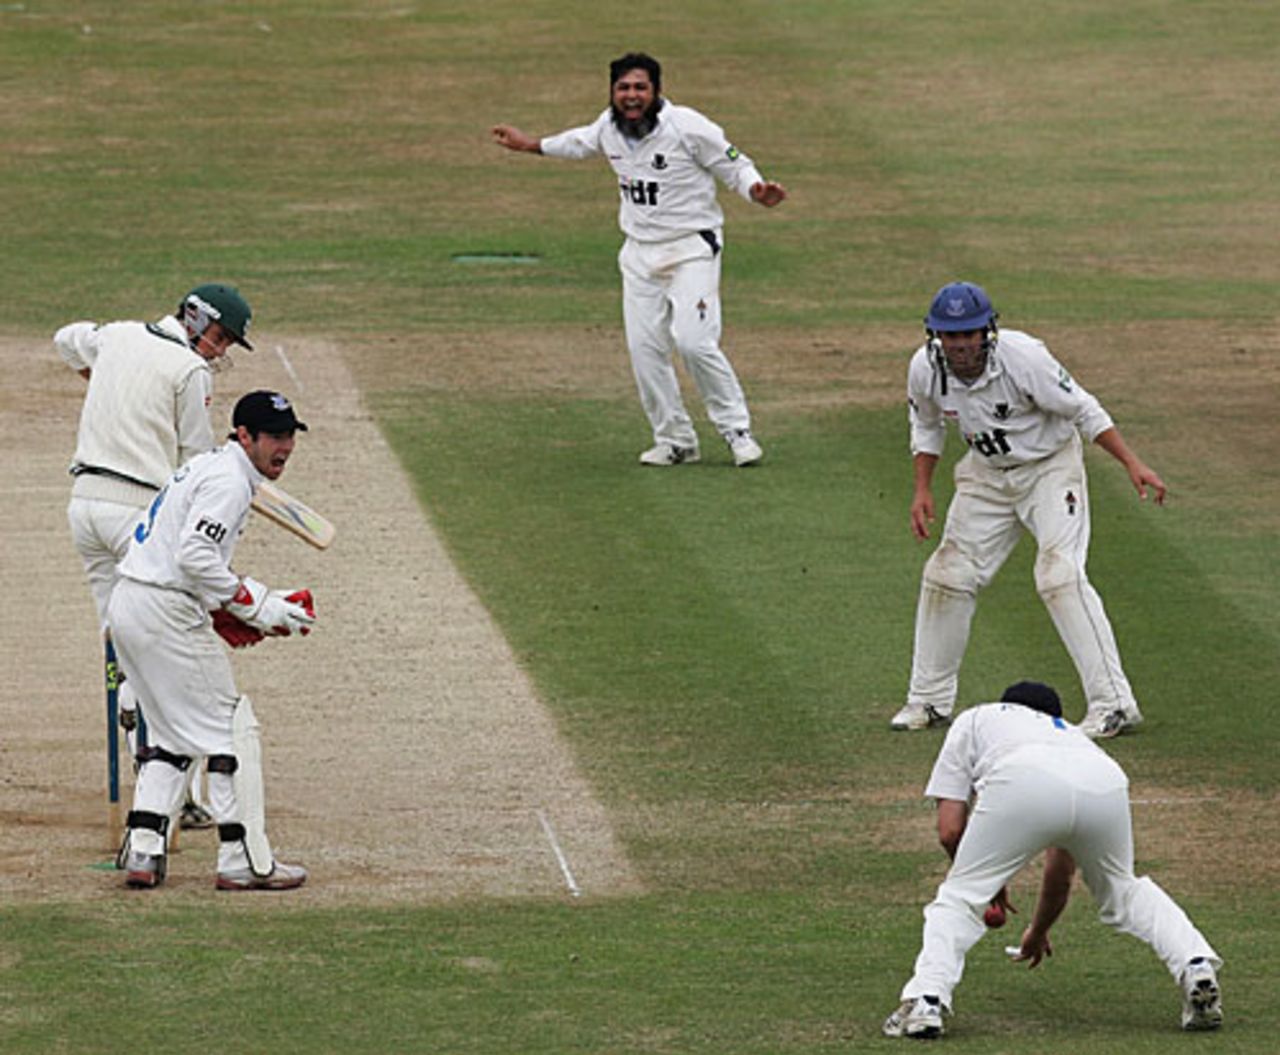 Chris Adams catches Richard Jones off Mushtaq Ahmed, Sussex v Worcestershire, Hove, September 21, 2007 